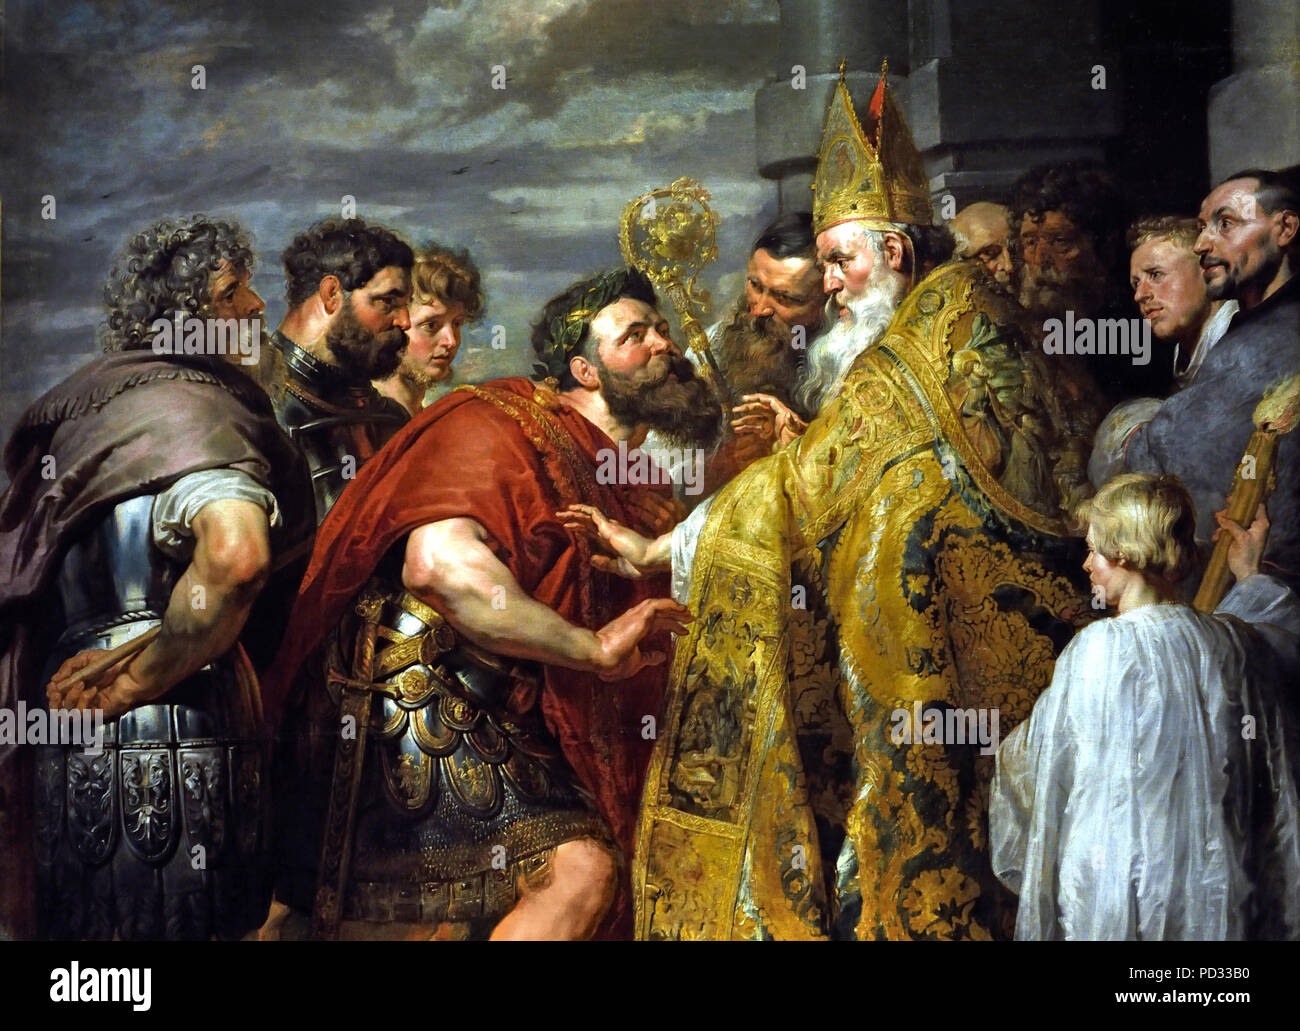 St Ambrose and Emperor Theodosius  by Peter Paul Rubens (1577–1640) Flemish Belgian Belgium ( It shows the Roman emperor Theodosius I and his entourage being barred from Milan Cathedral by its archbishop saint Ambrose, as punishment for the Massacre of Thessalonica. ) Stock Photo